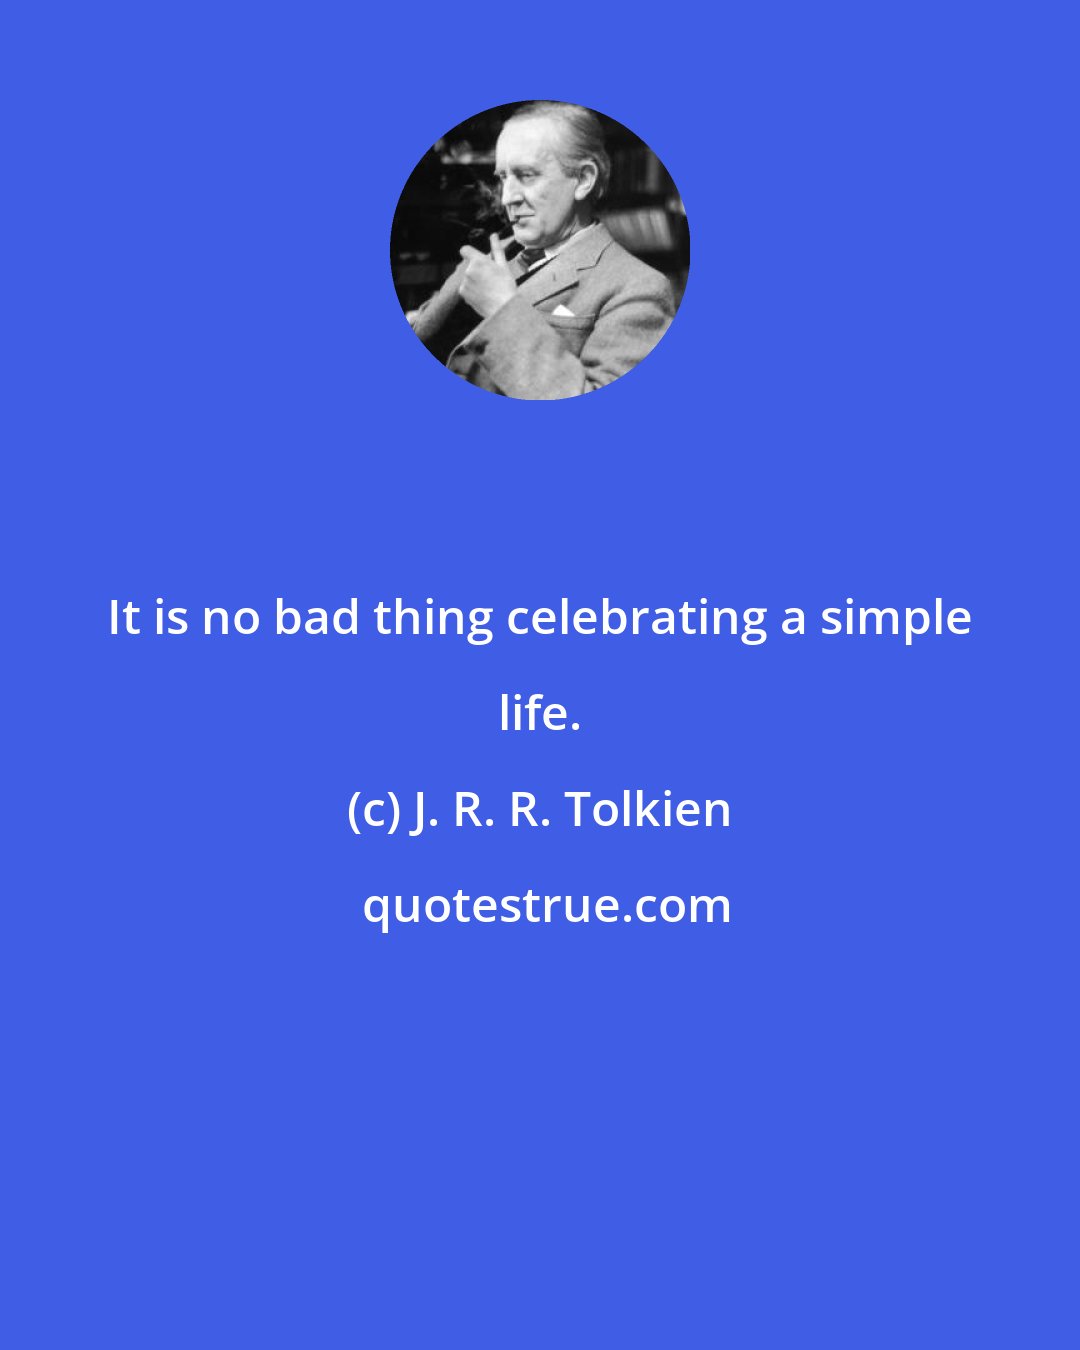 J. R. R. Tolkien: It is no bad thing celebrating a simple life.